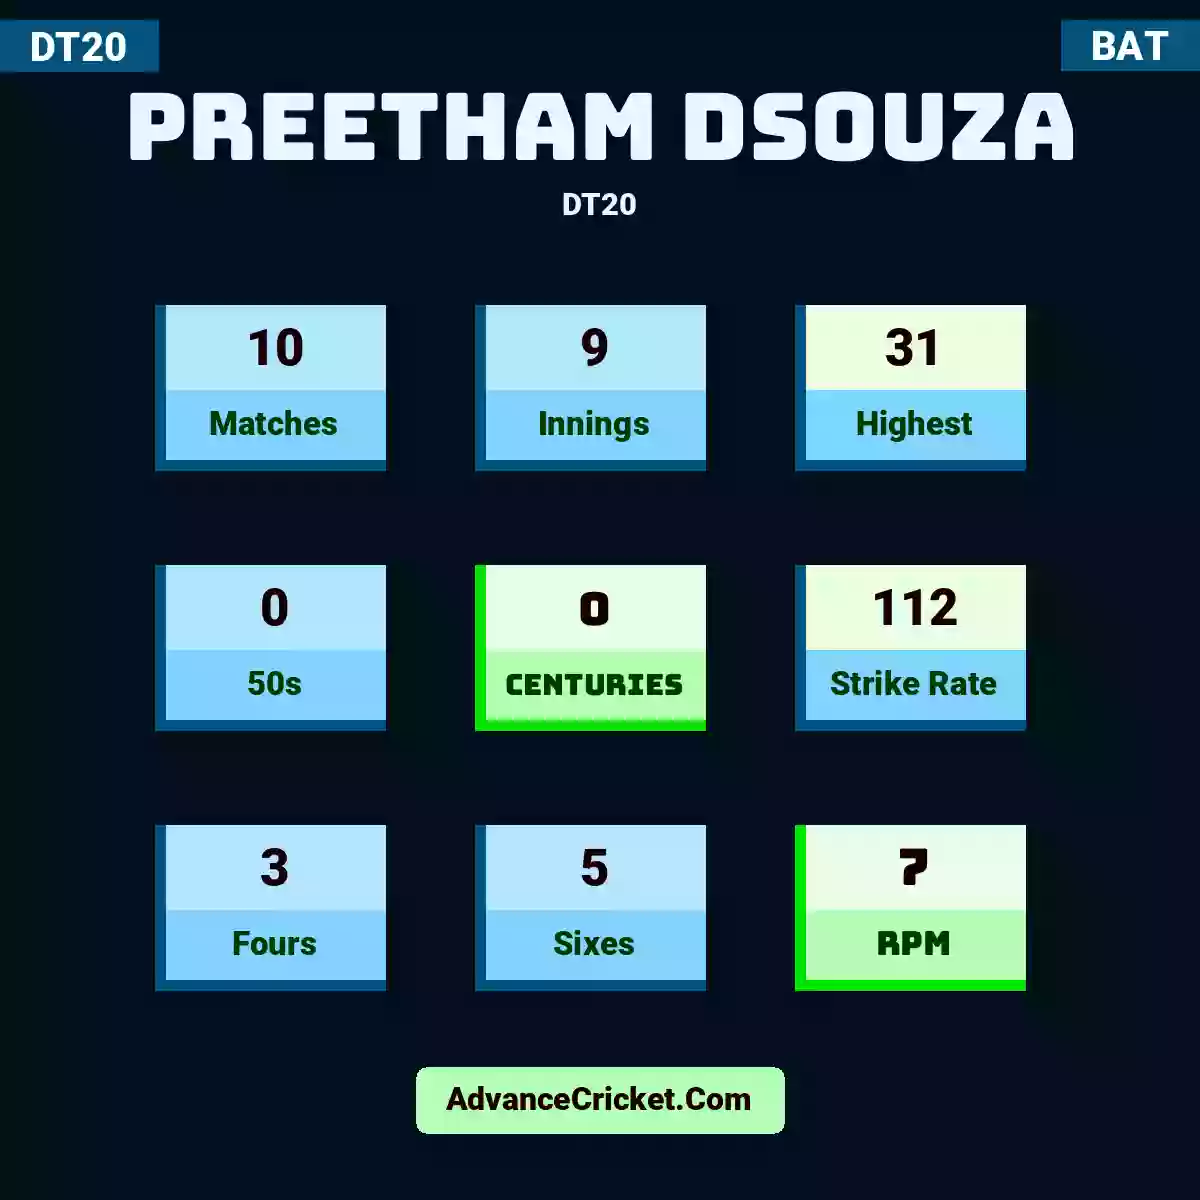 Preetham Dsouza DT20 , Preetham Dsouza played 10 matches, scored 31 runs as highest, 0 half-centuries, and 0 centuries, with a strike rate of 112. P.Dsouza hit 3 fours and 5 sixes, with an RPM of 7.